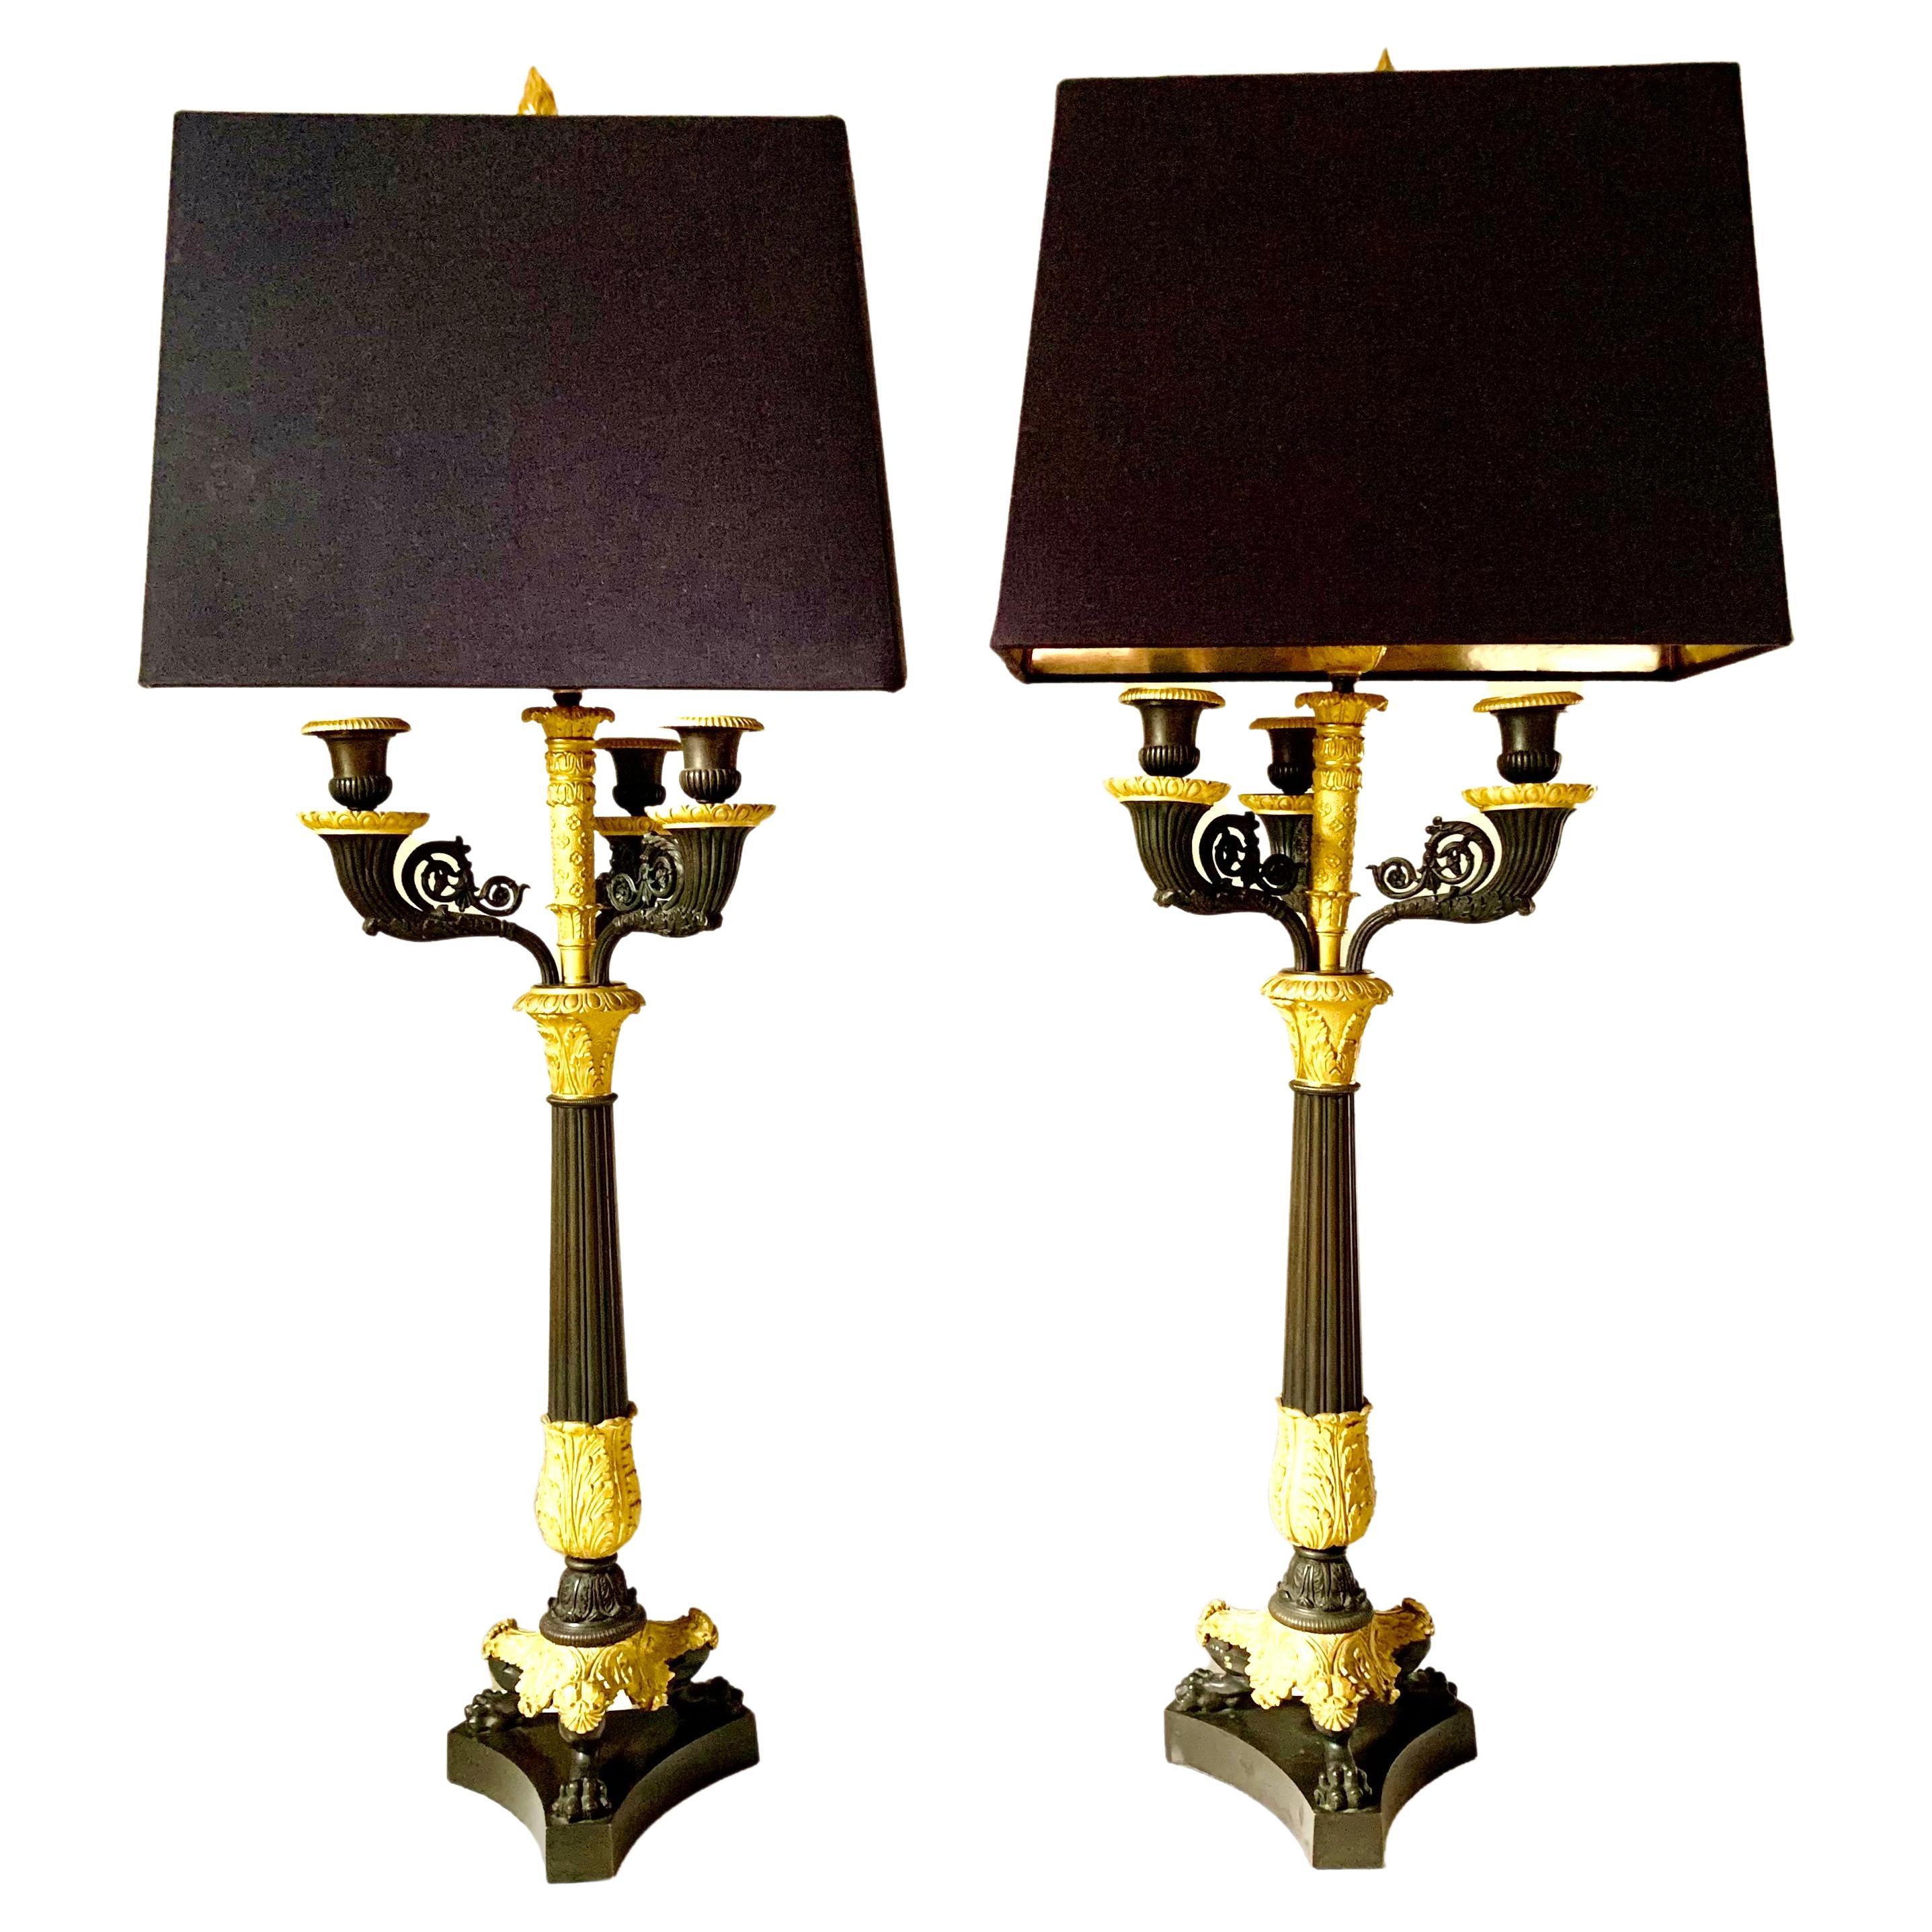 Pair Charles X Empire Period Gilt, Patinated Bronze Candelabra Lamps, circa 1830 For Sale